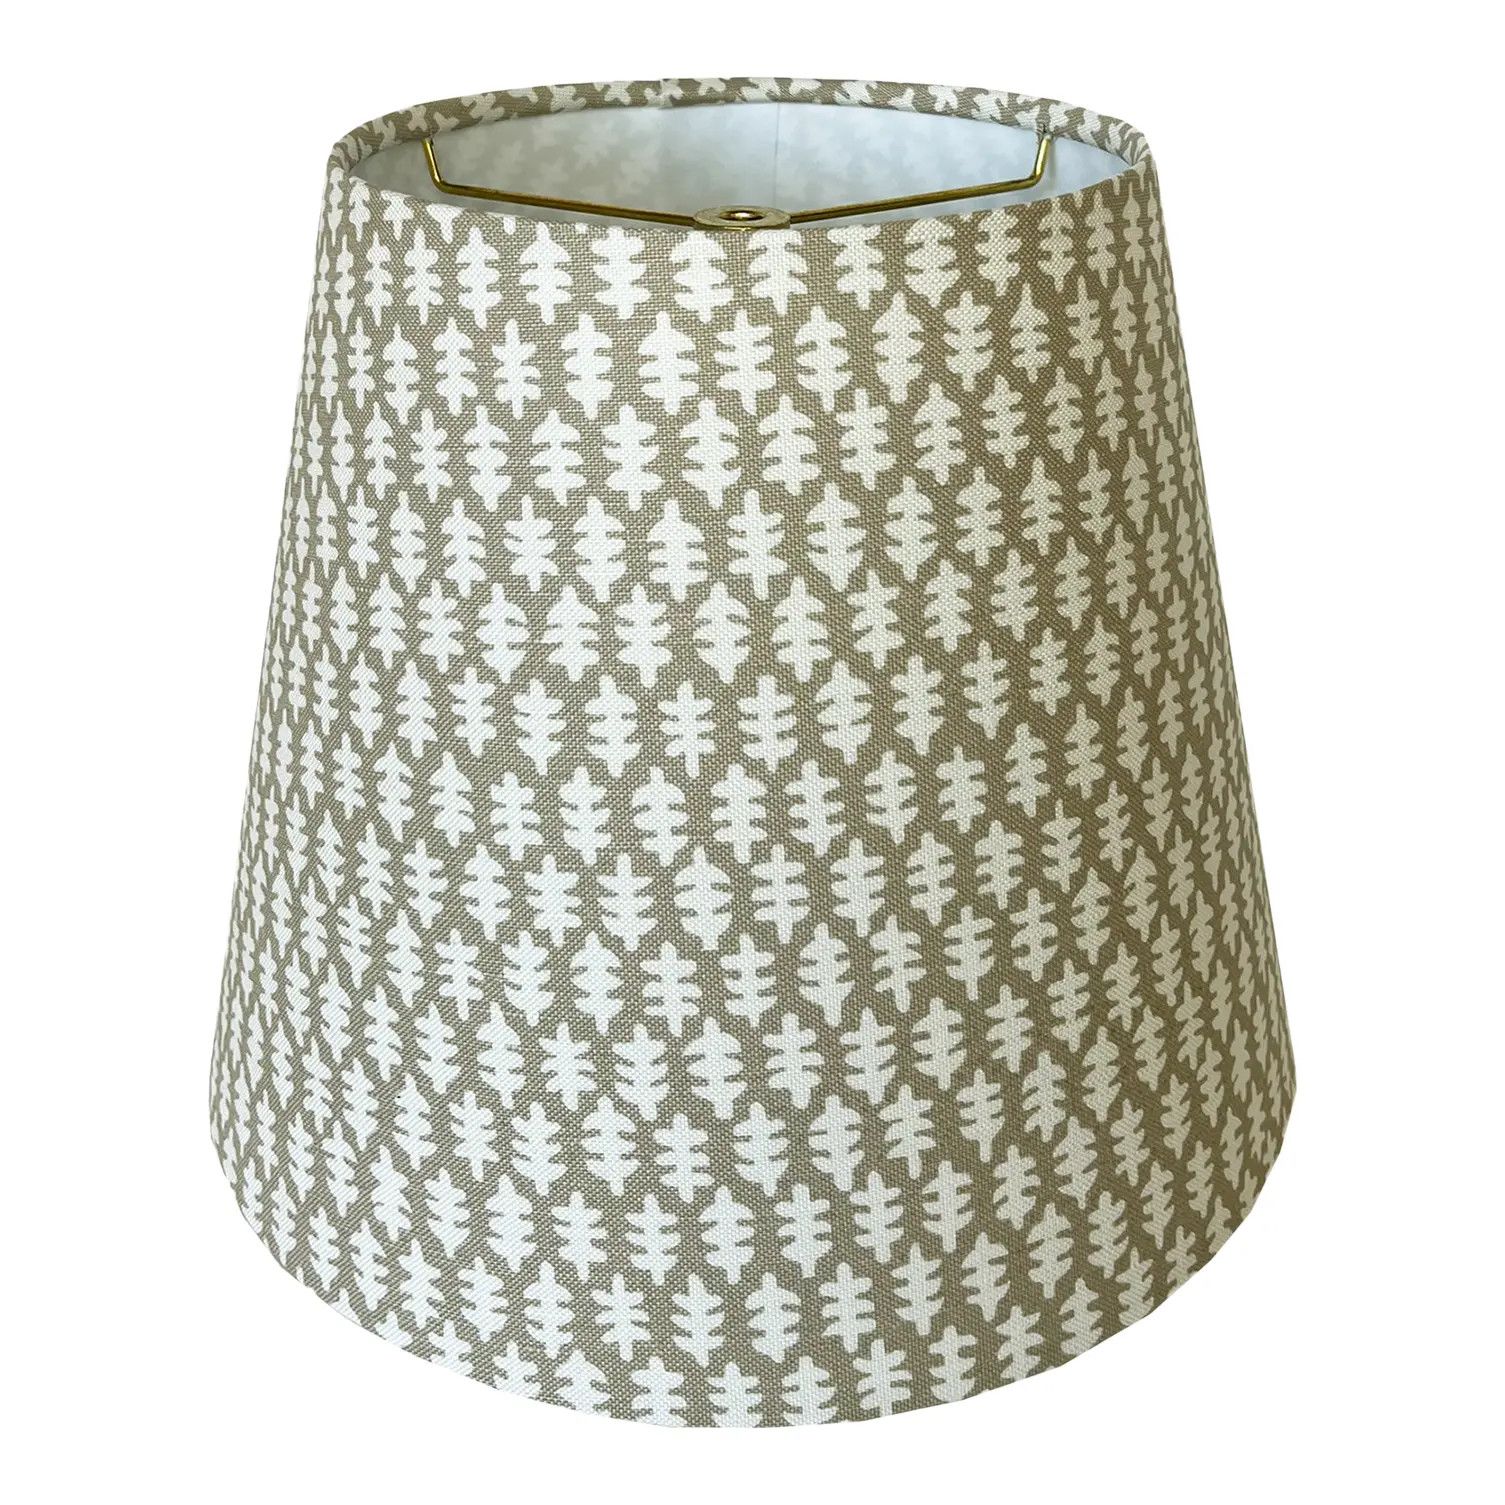 Empire Lamp Shade With Small Print Pattern, 7"td X 14"bd X 10"ht | Chairish